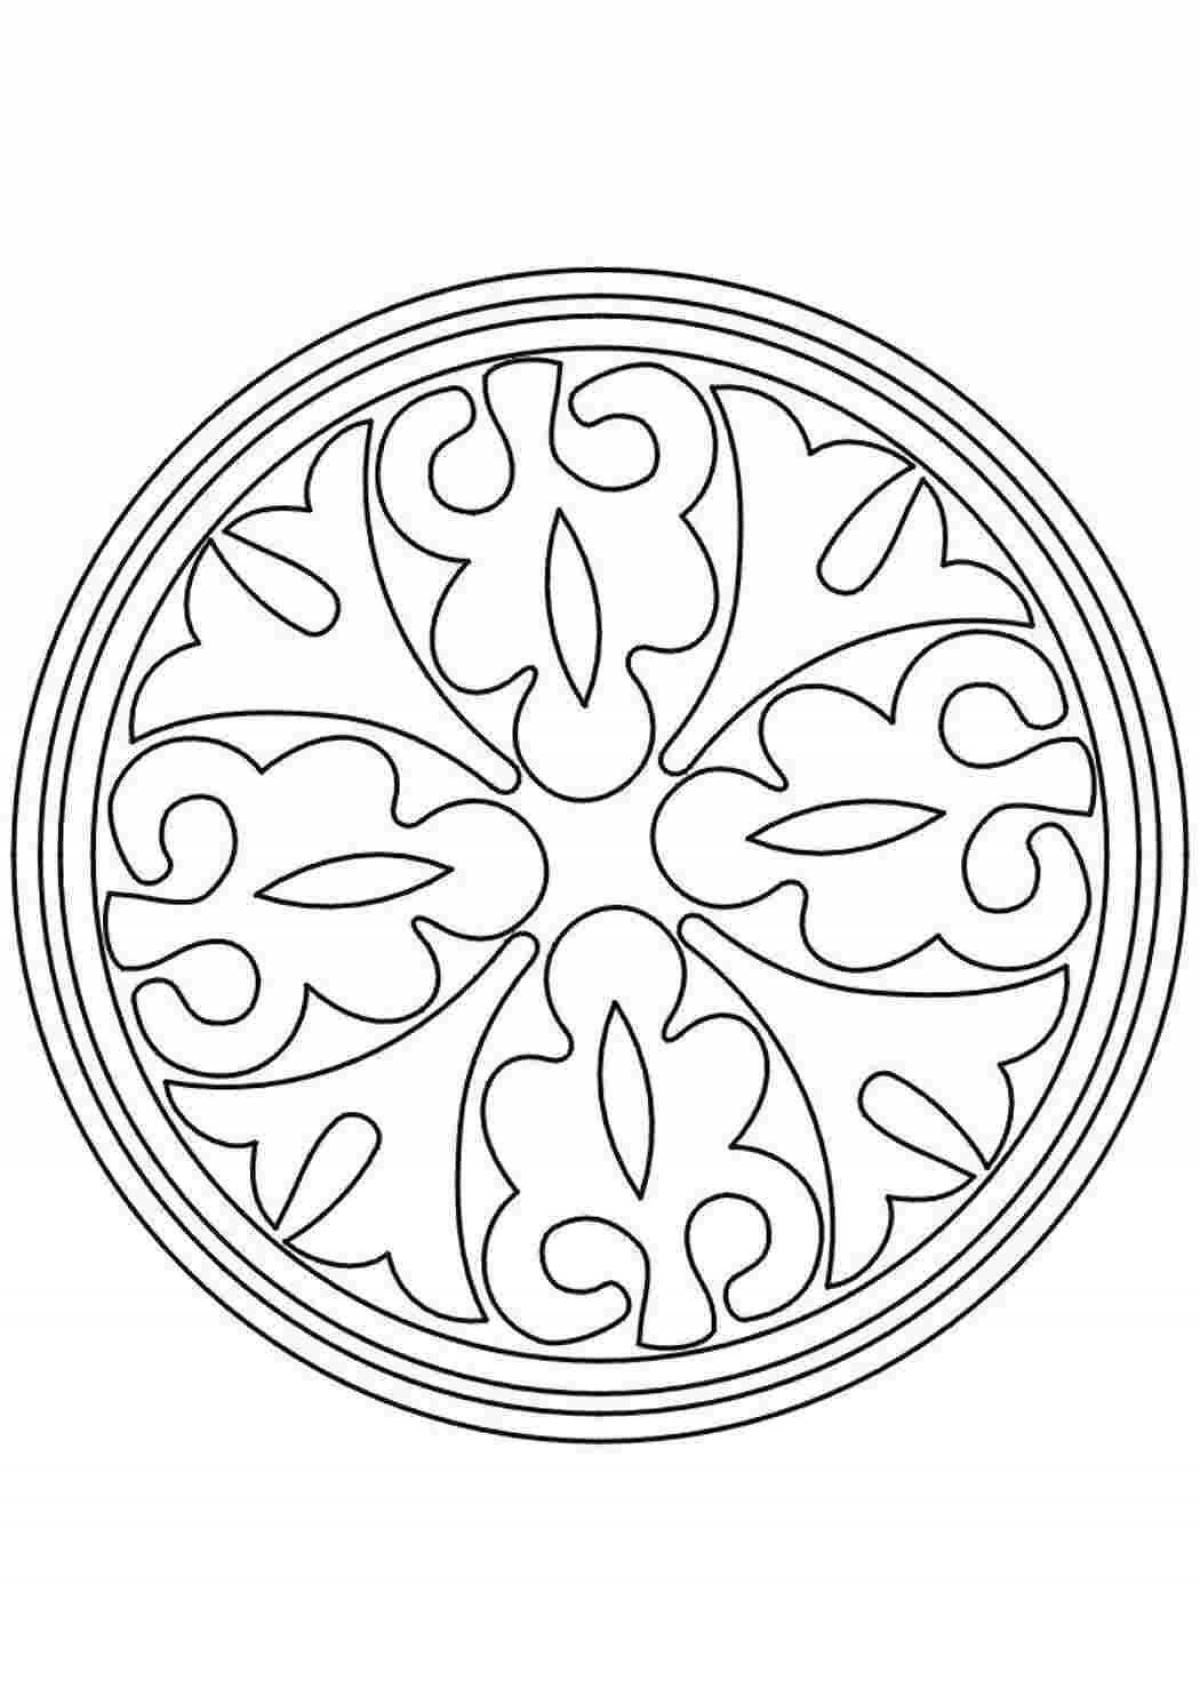 Coloring page dazzling Bashkir ornament